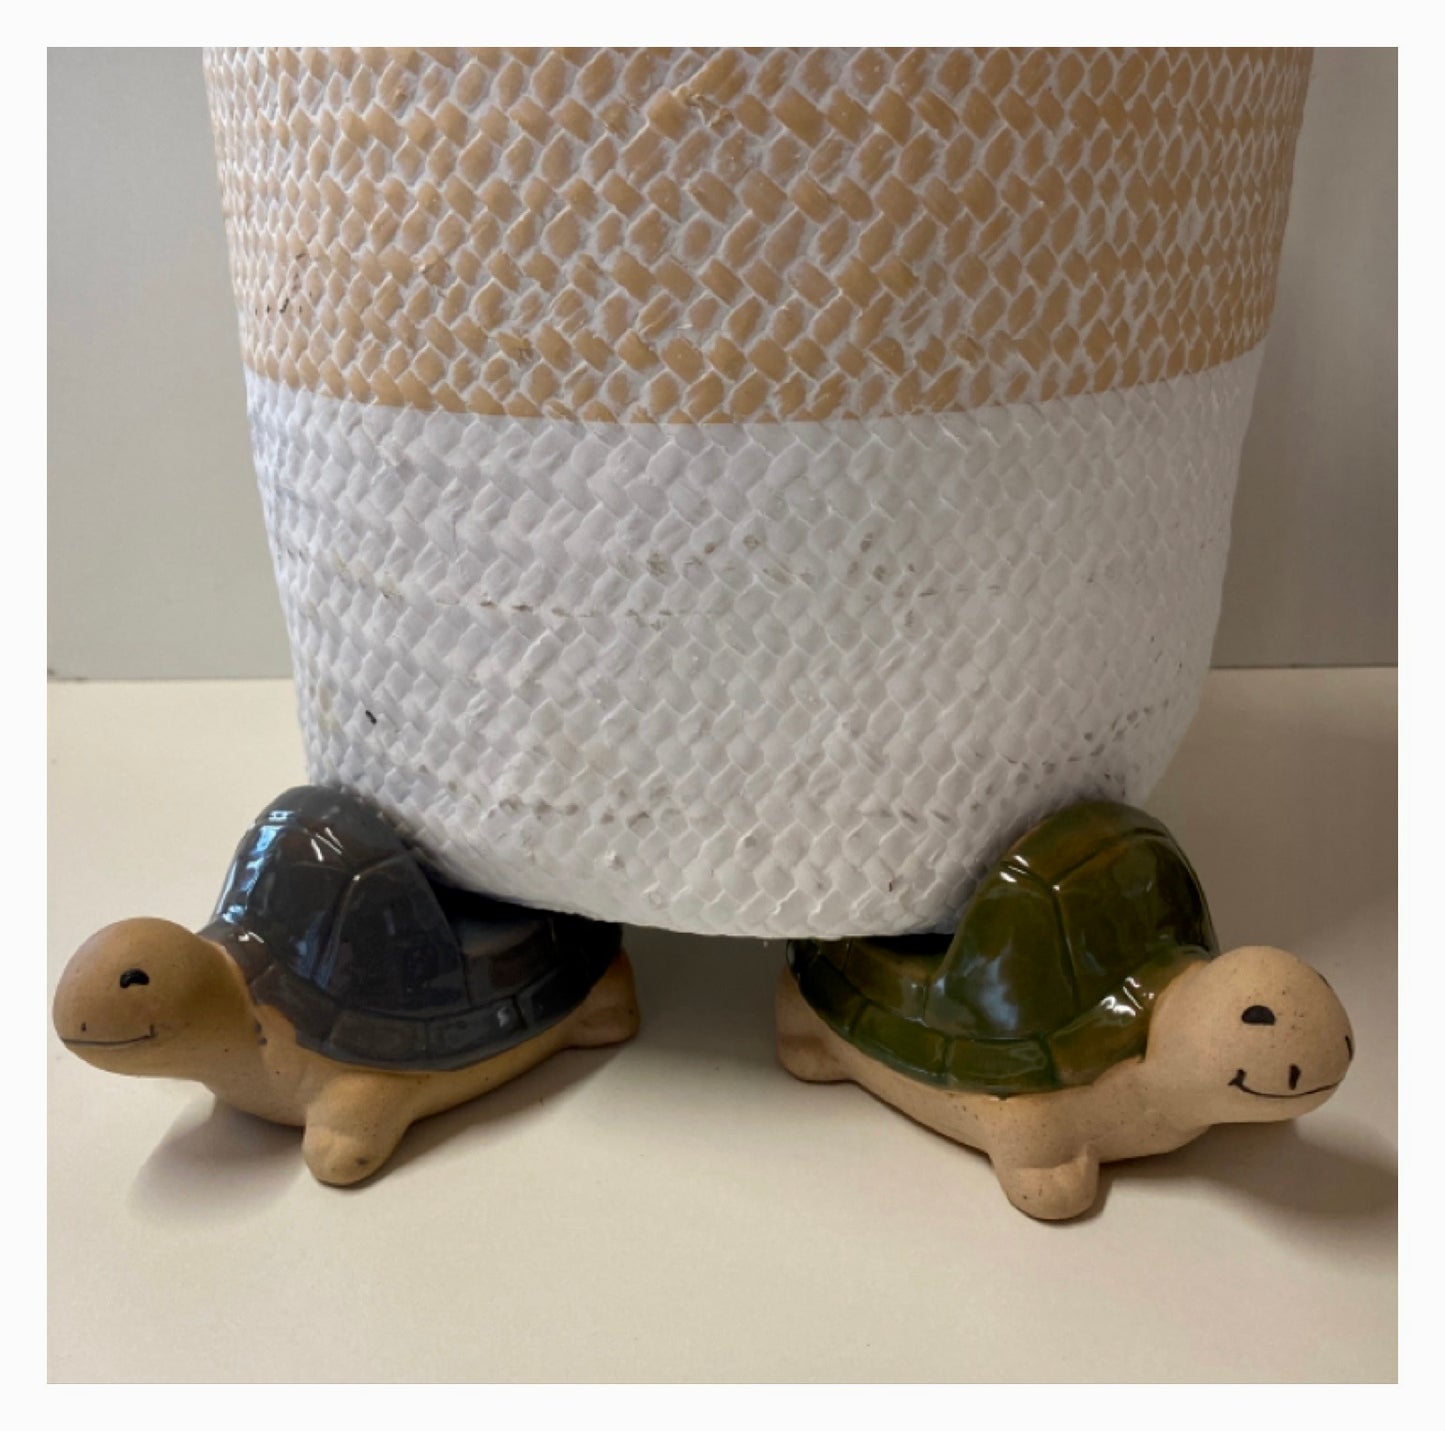 Pot Plant Feet Turtle Set of 3 - The Renmy Store Homewares & Gifts 